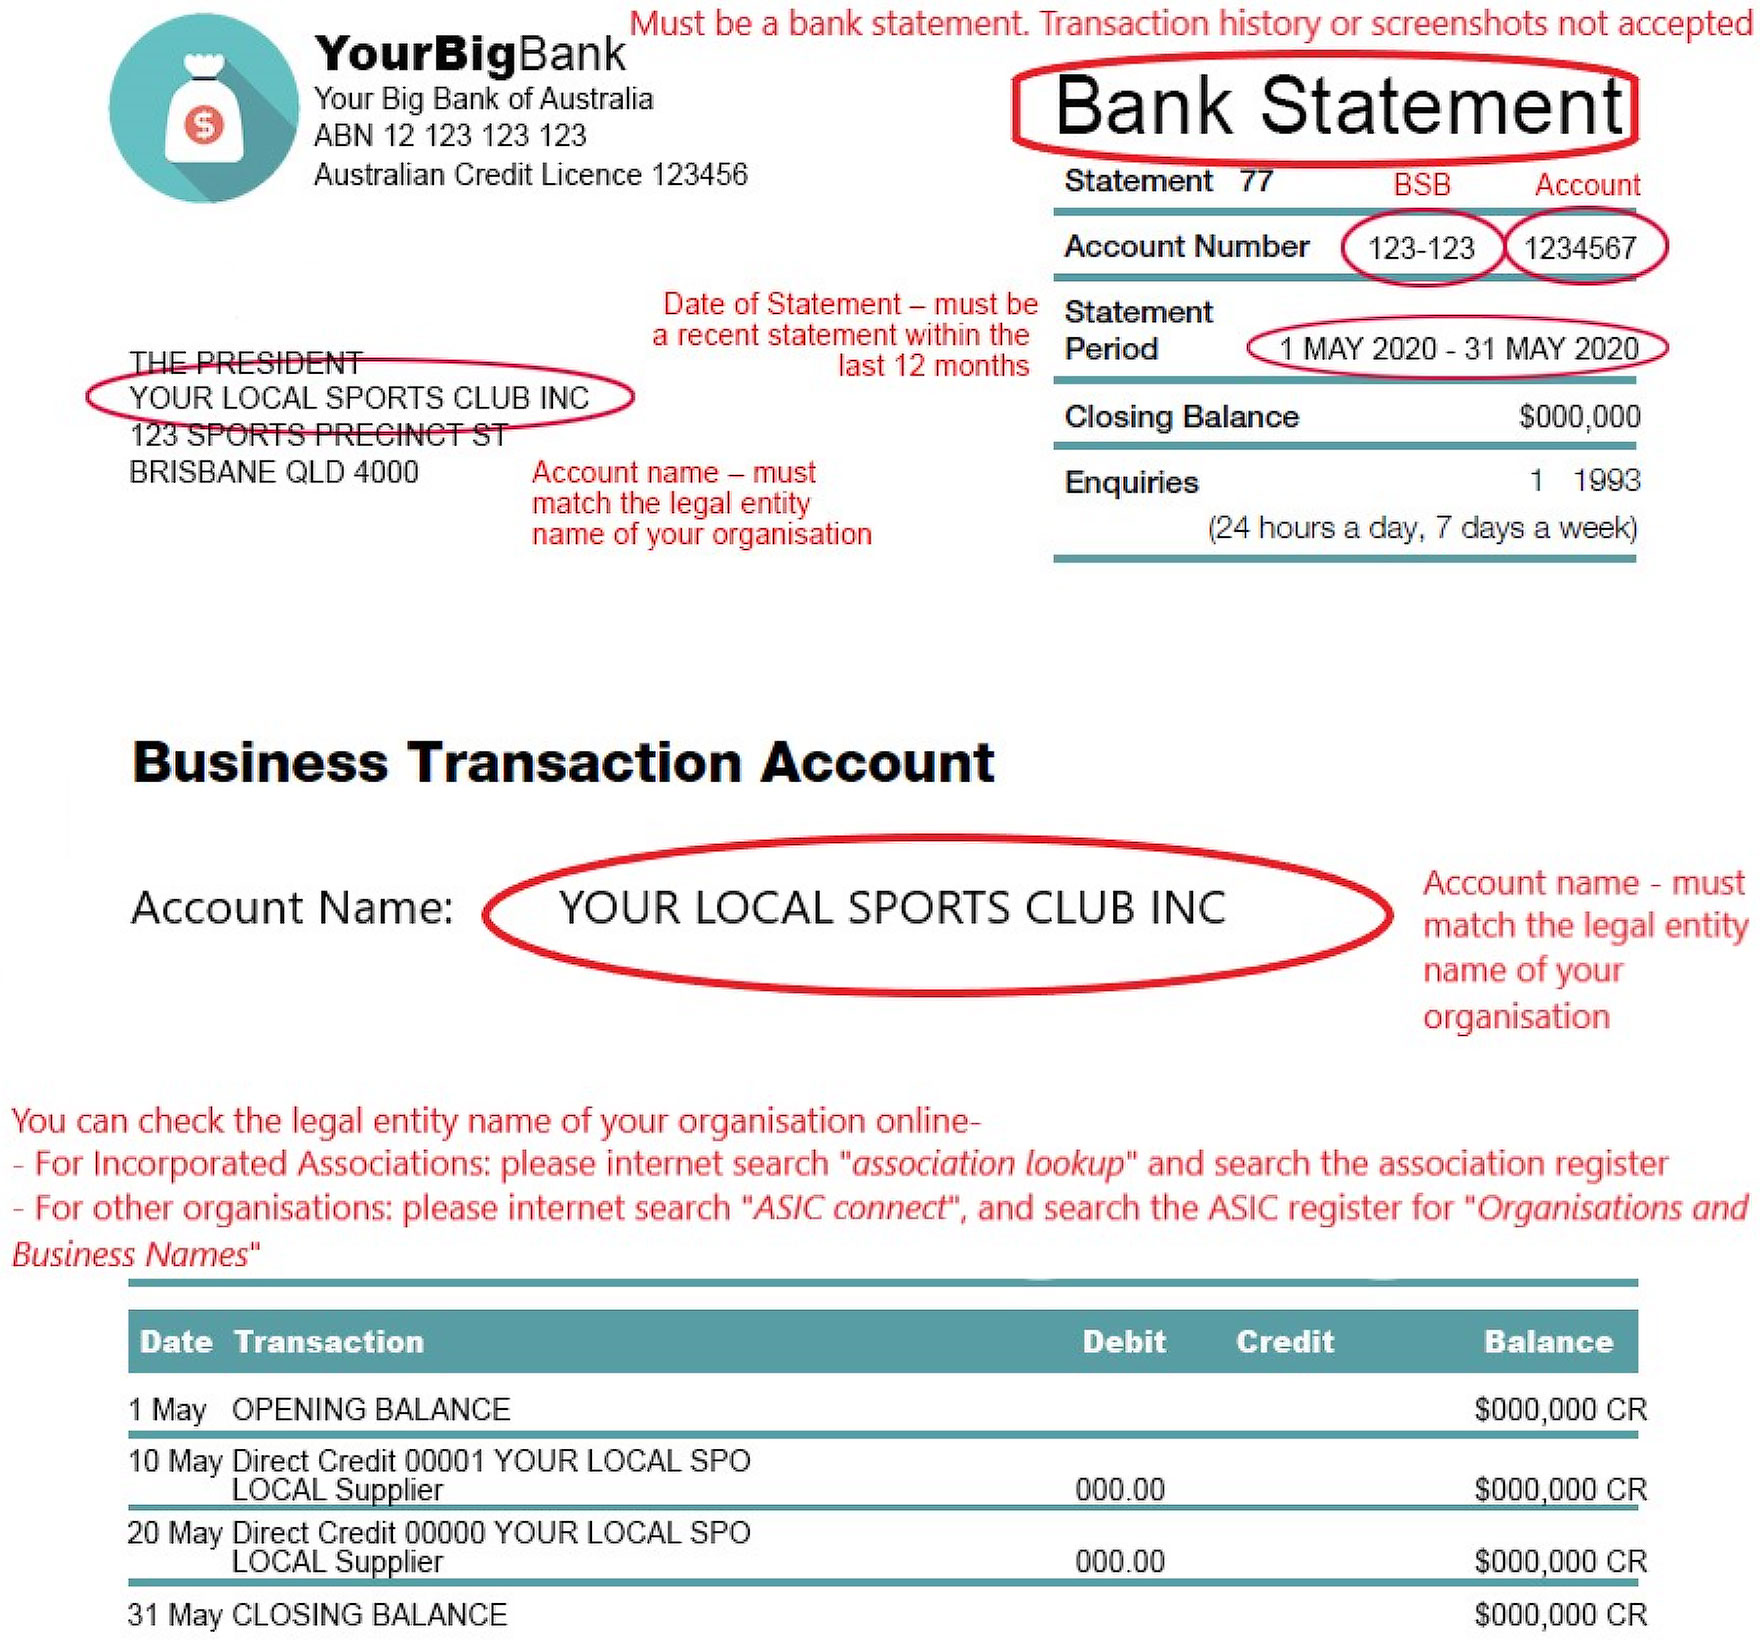 A bank statement used as an example that is detailing what is needed for the application.